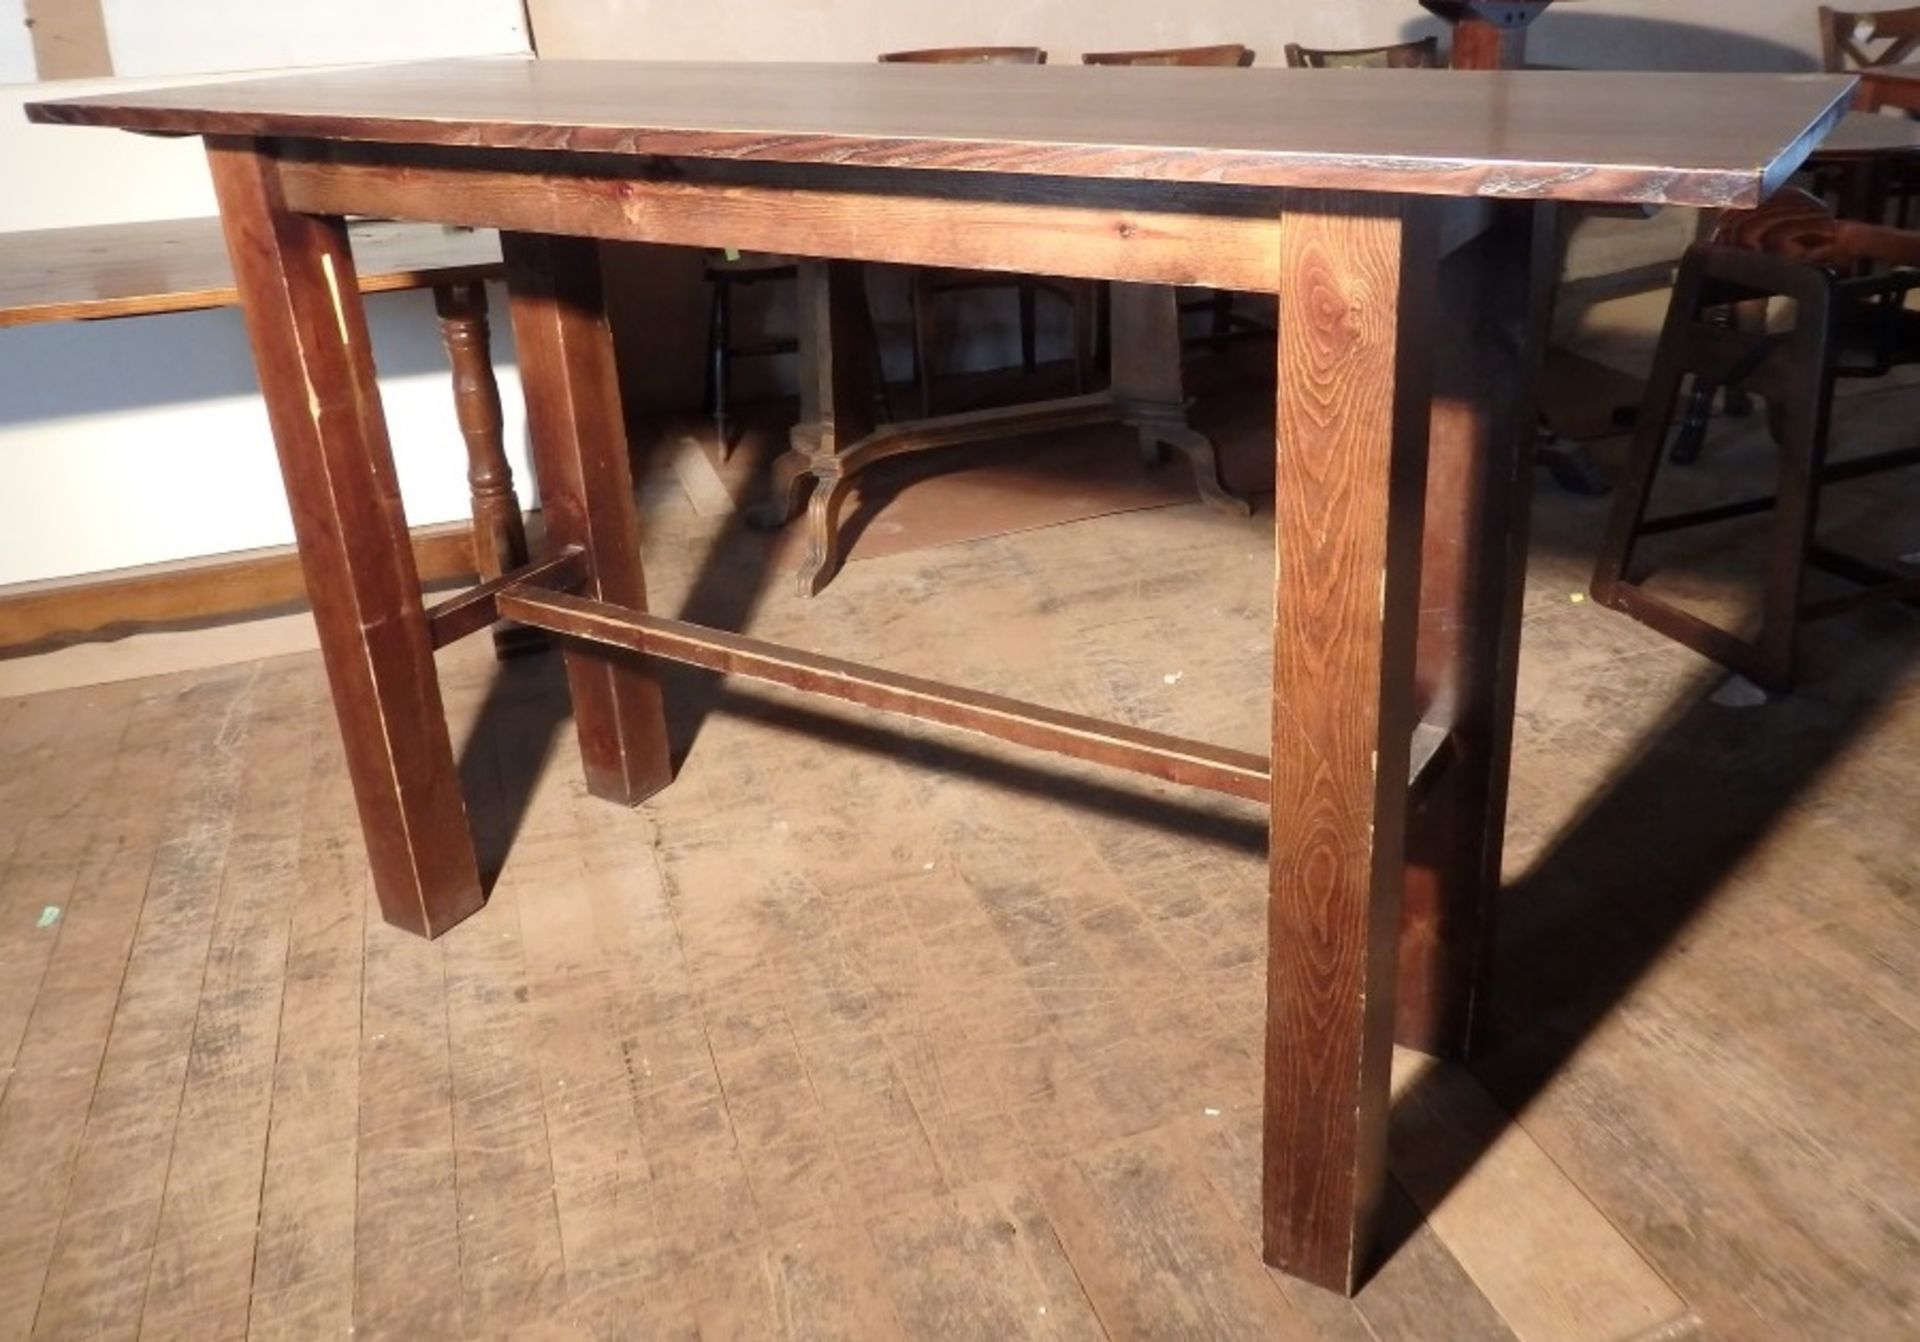 1 x Tall, Sturdy Rectangular Solid Wood Dining Table - Recently Taken From A Bar & Restaurant - Image 6 of 8